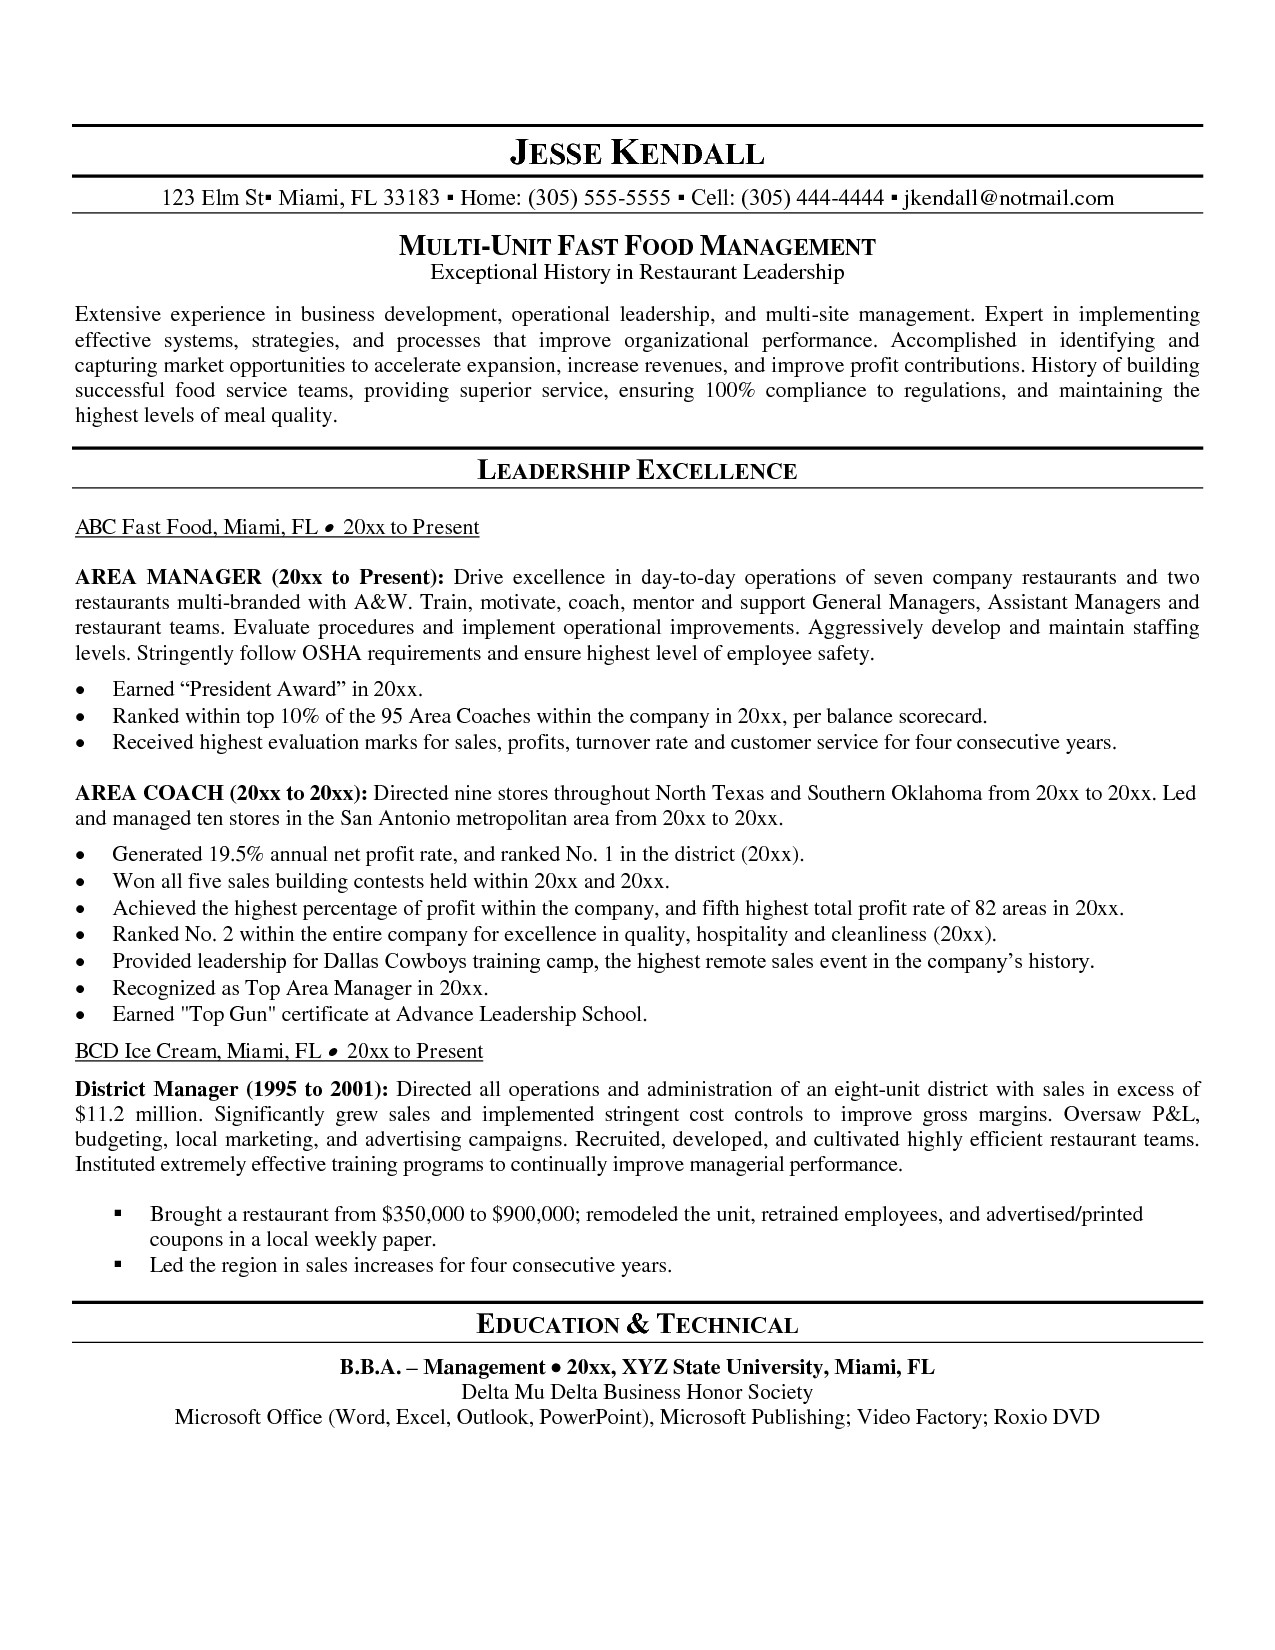 nurses cover letter template example-Resume for Nurses Template Related Post 3-k